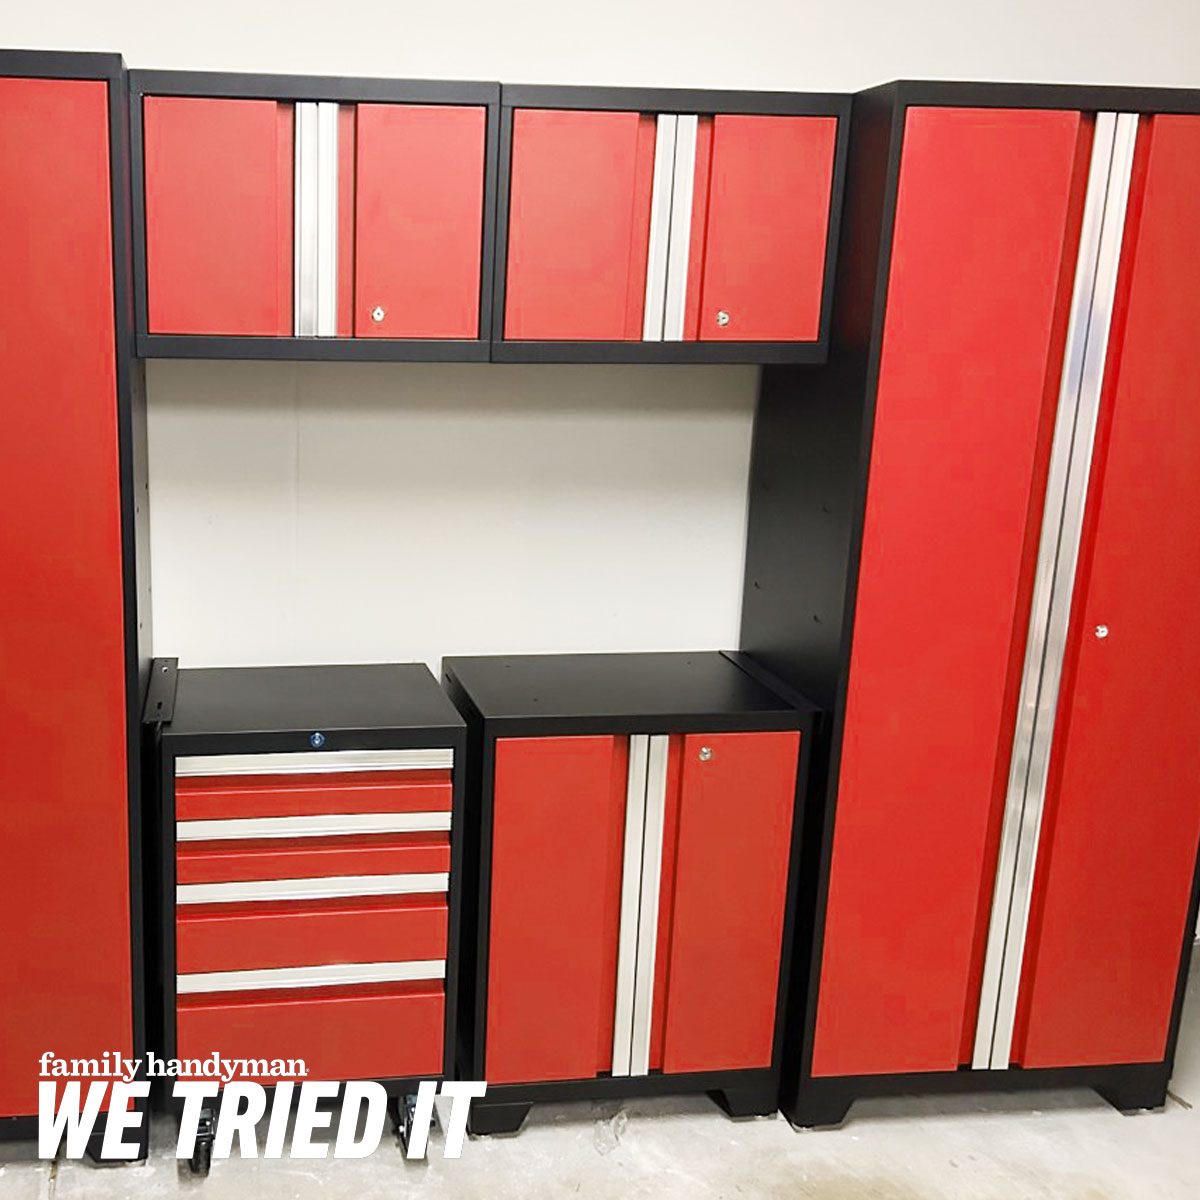 Organize Your Space with Customizable NewAge Products Garage Cabinets - We Tried It!